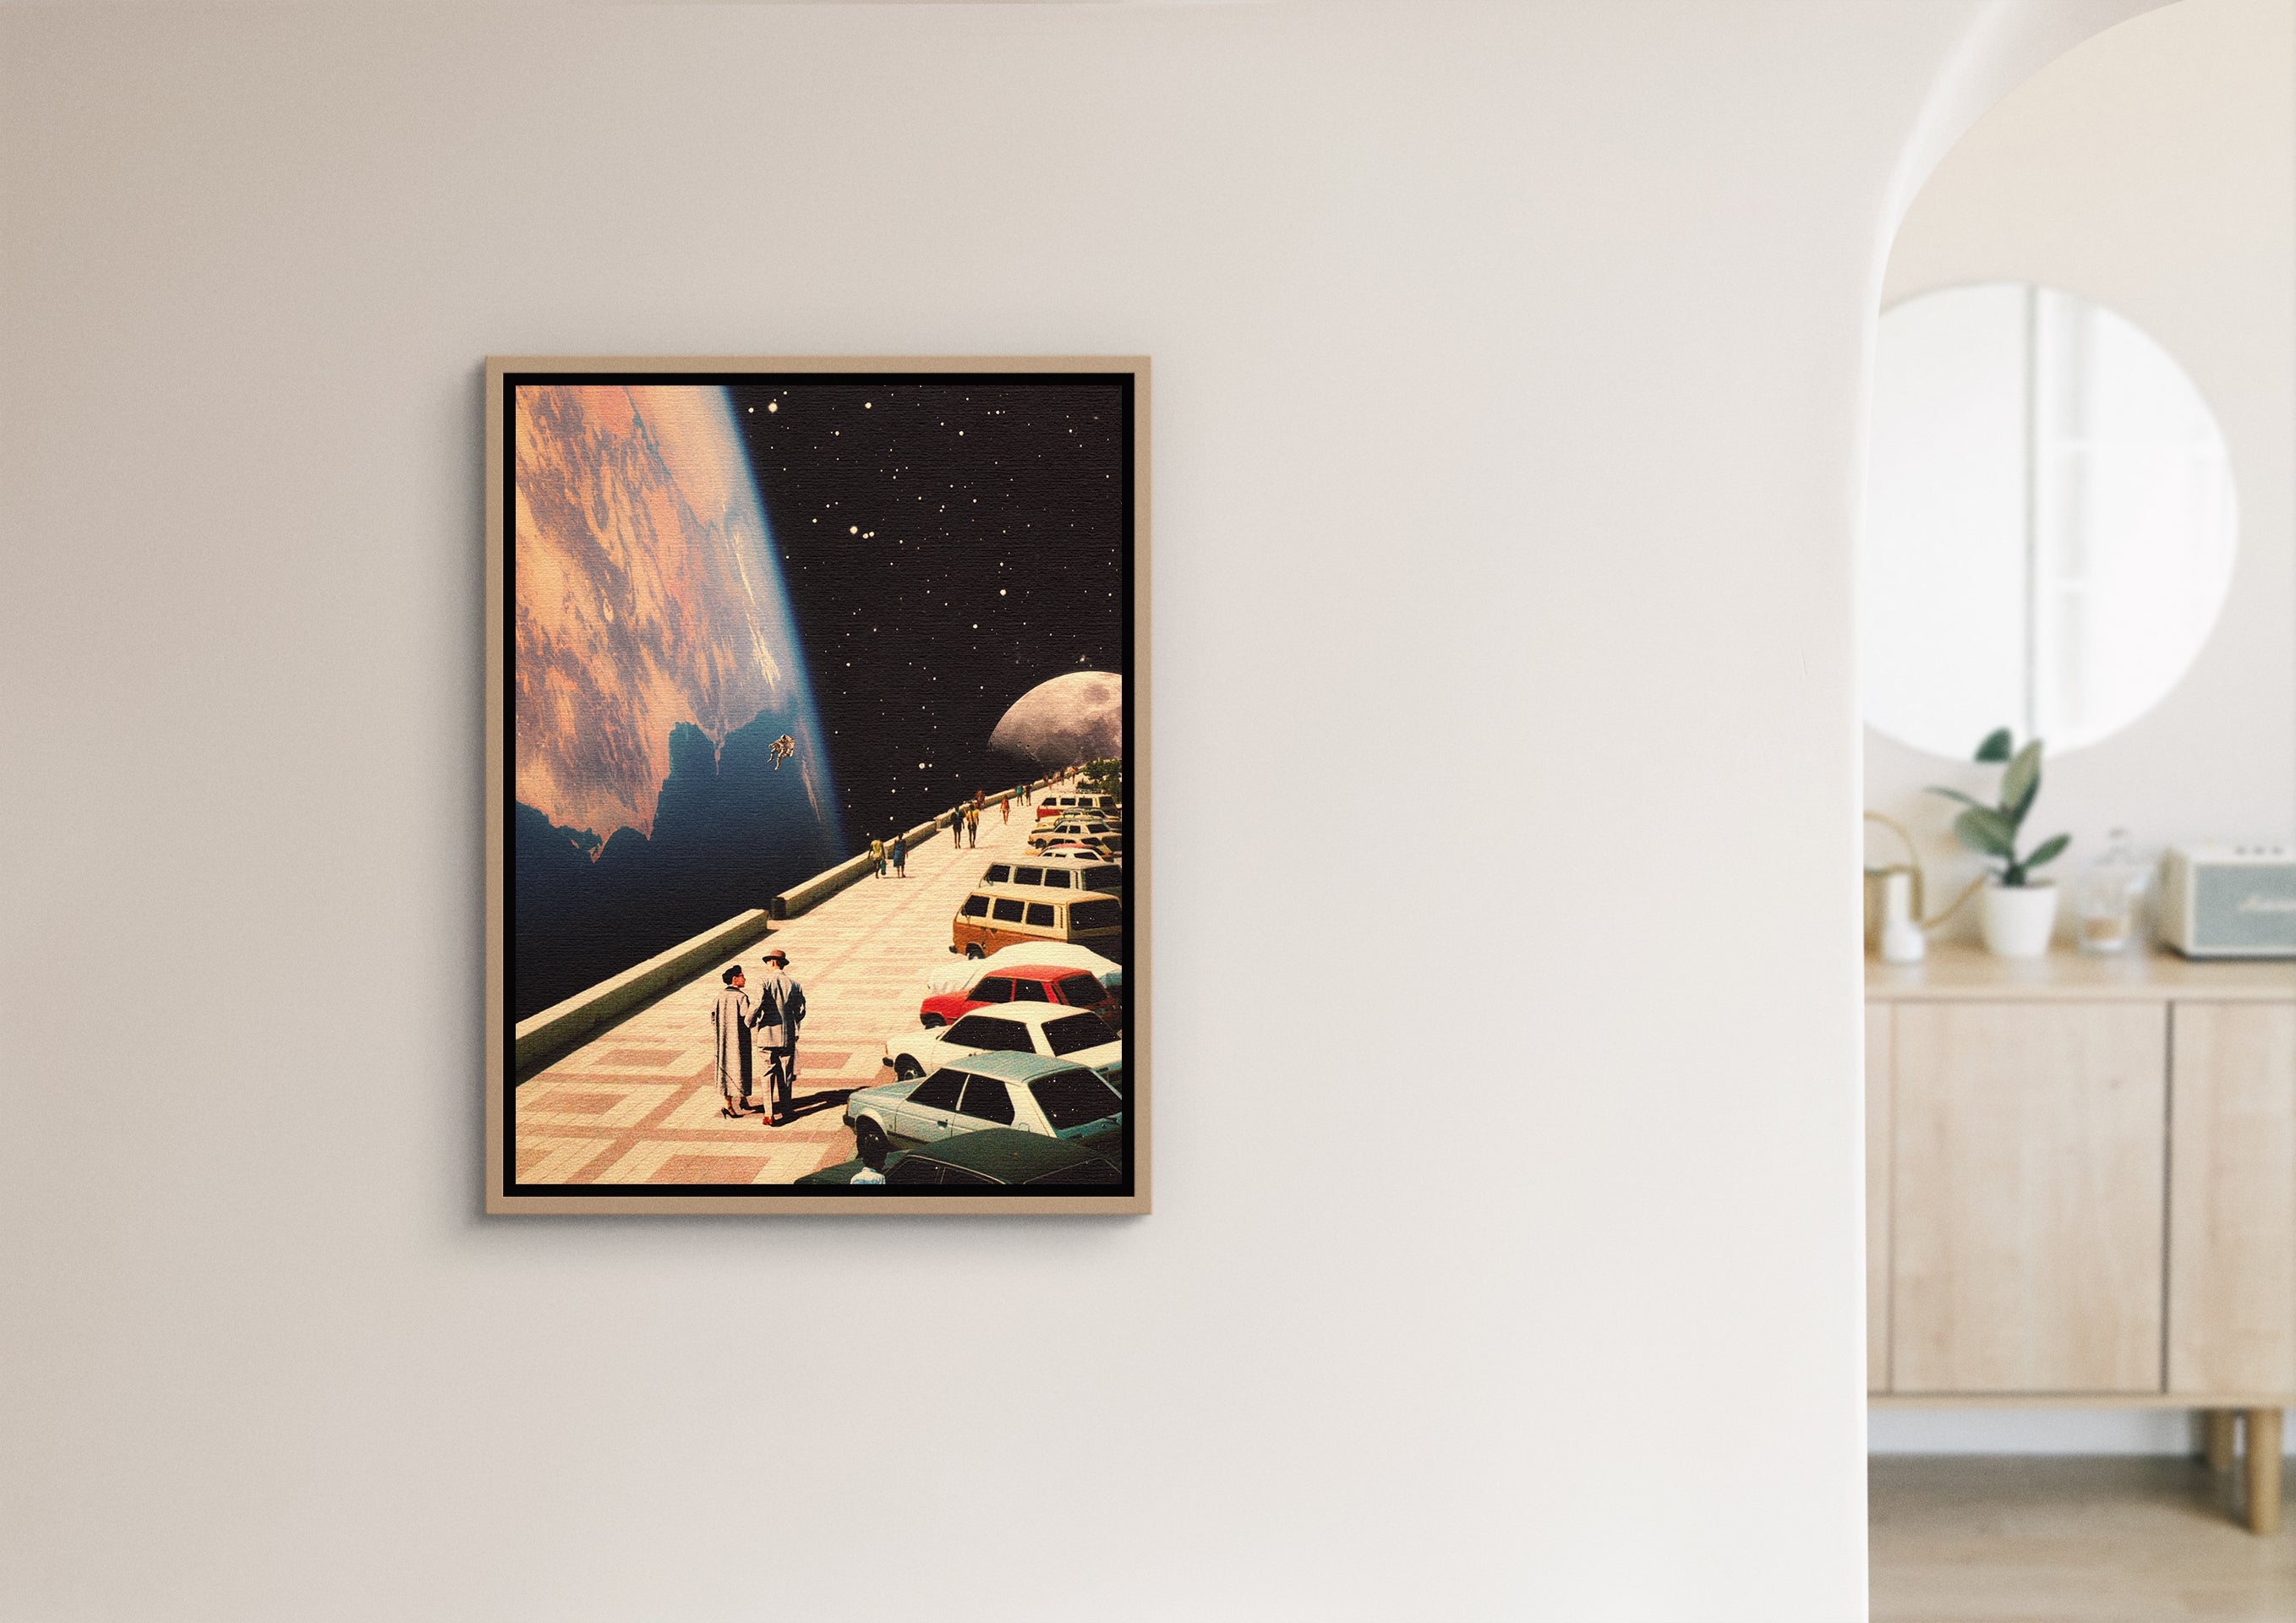 A big framed print of the Space Promenade artwork hanging on the wall next to another room.